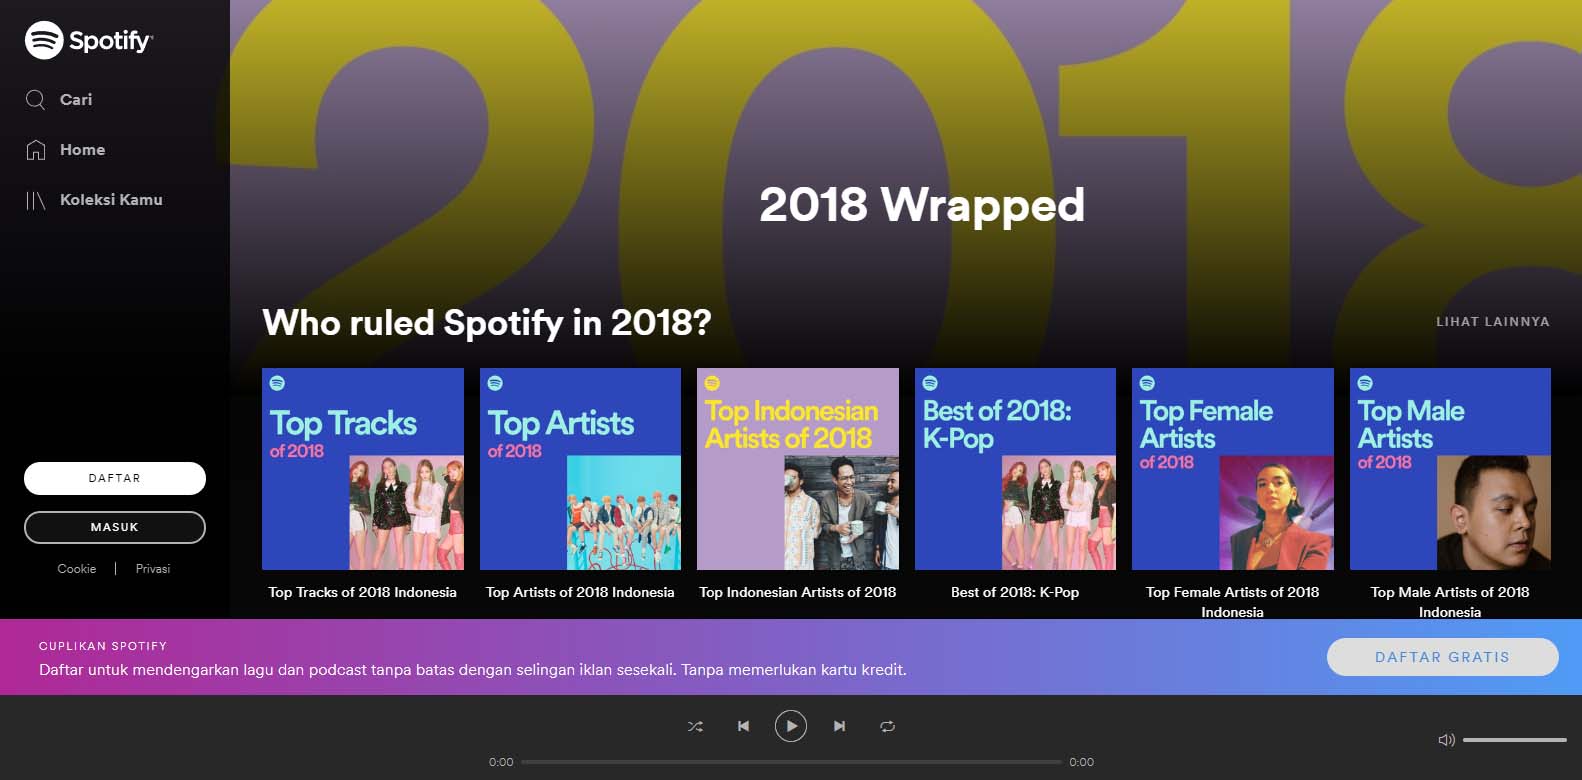 Spotify Wrapped 2018 - Here's How to See the Spotify Music You've Listened This Year, how to find downloaded songs on spotify iphone, see all songs spotify mobile, spotify history iphone, full spotify history, view all songs by artist spotify, how to see all songs by an artist on iphone spotify, spotify login, spotify web player